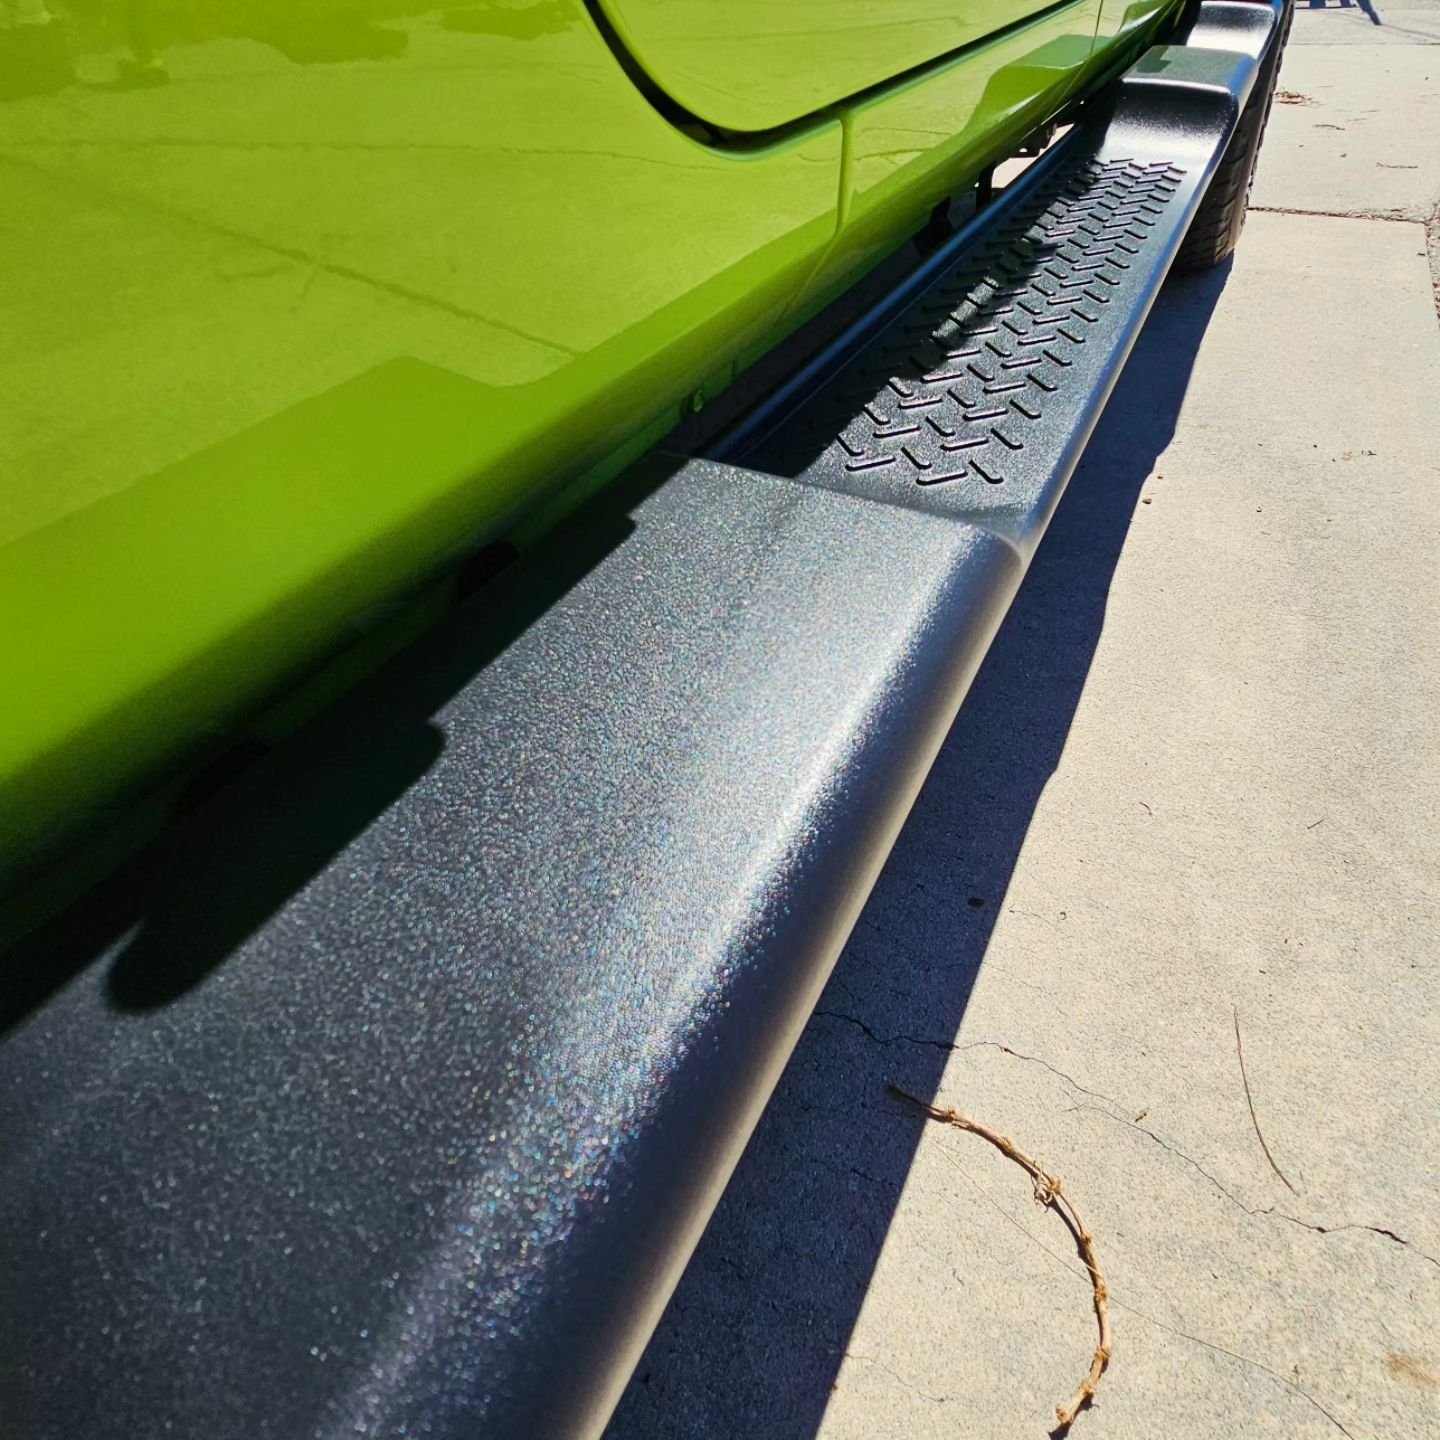 Here are some before and after photos of the trim conditioning done to the Jeep. We also offer 5-7 ceramic coating options that will enhance the color and provide additional protection against the elements. 
-
Book now to protect your assets!
-
We Co